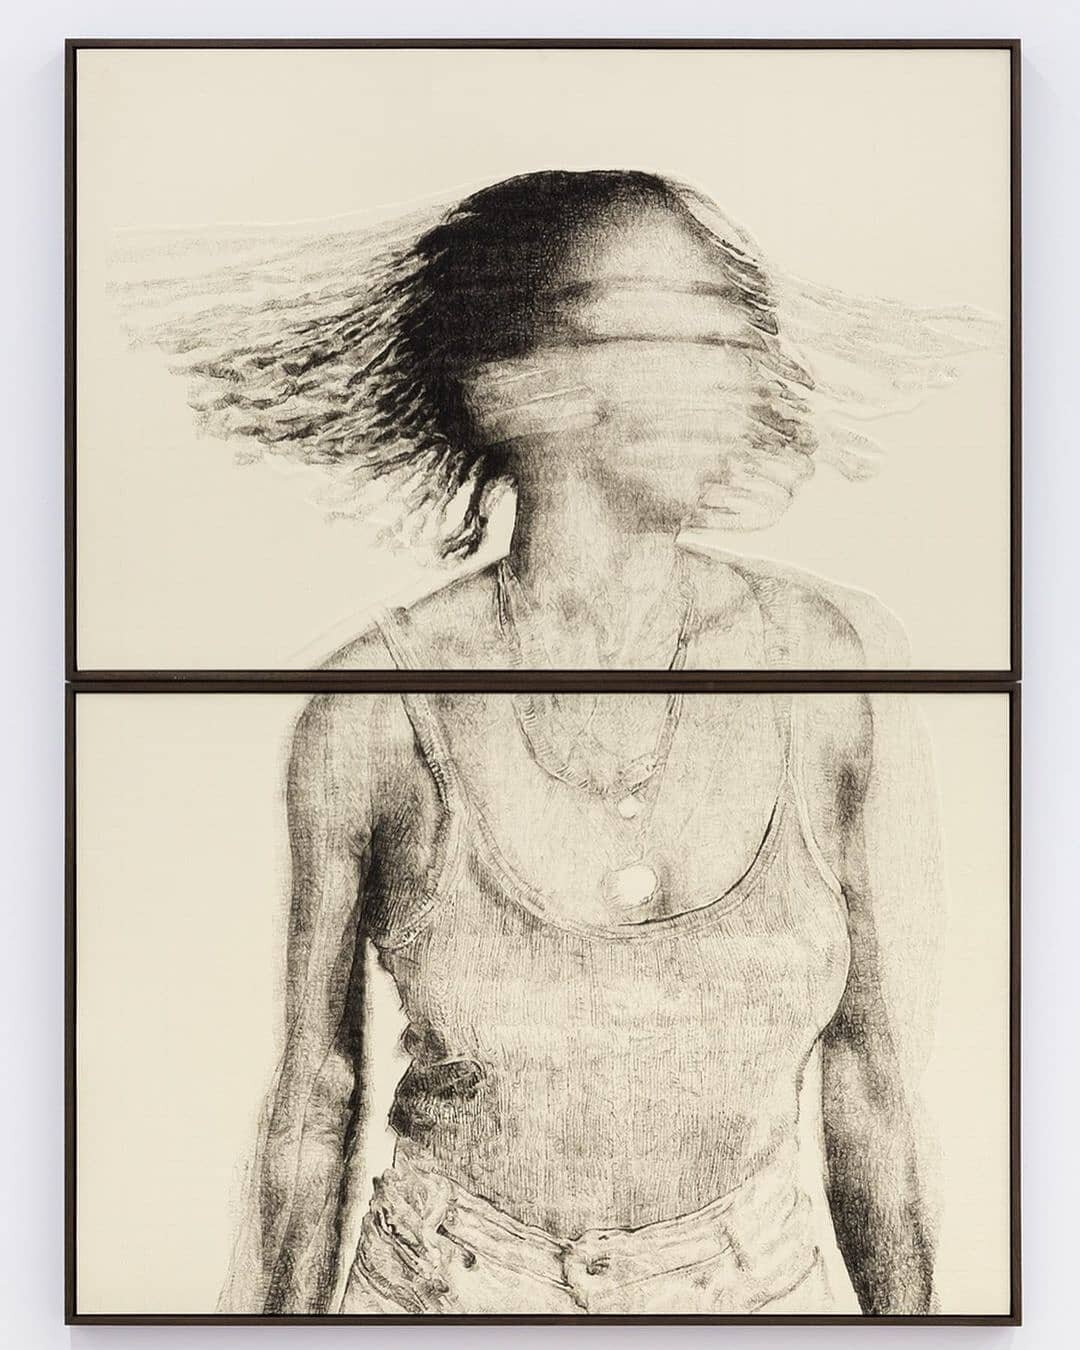 &ldquo;Breath as a Boundary&rdquo;. (2018). Kenturah Davis @kenturah
. oil paint applied with stamp letters with graphite grid on embossed mohachi paper. Reposted from @kenturah &quot;Thrilled to share that the @blantonmuseum acquired this drawing, w